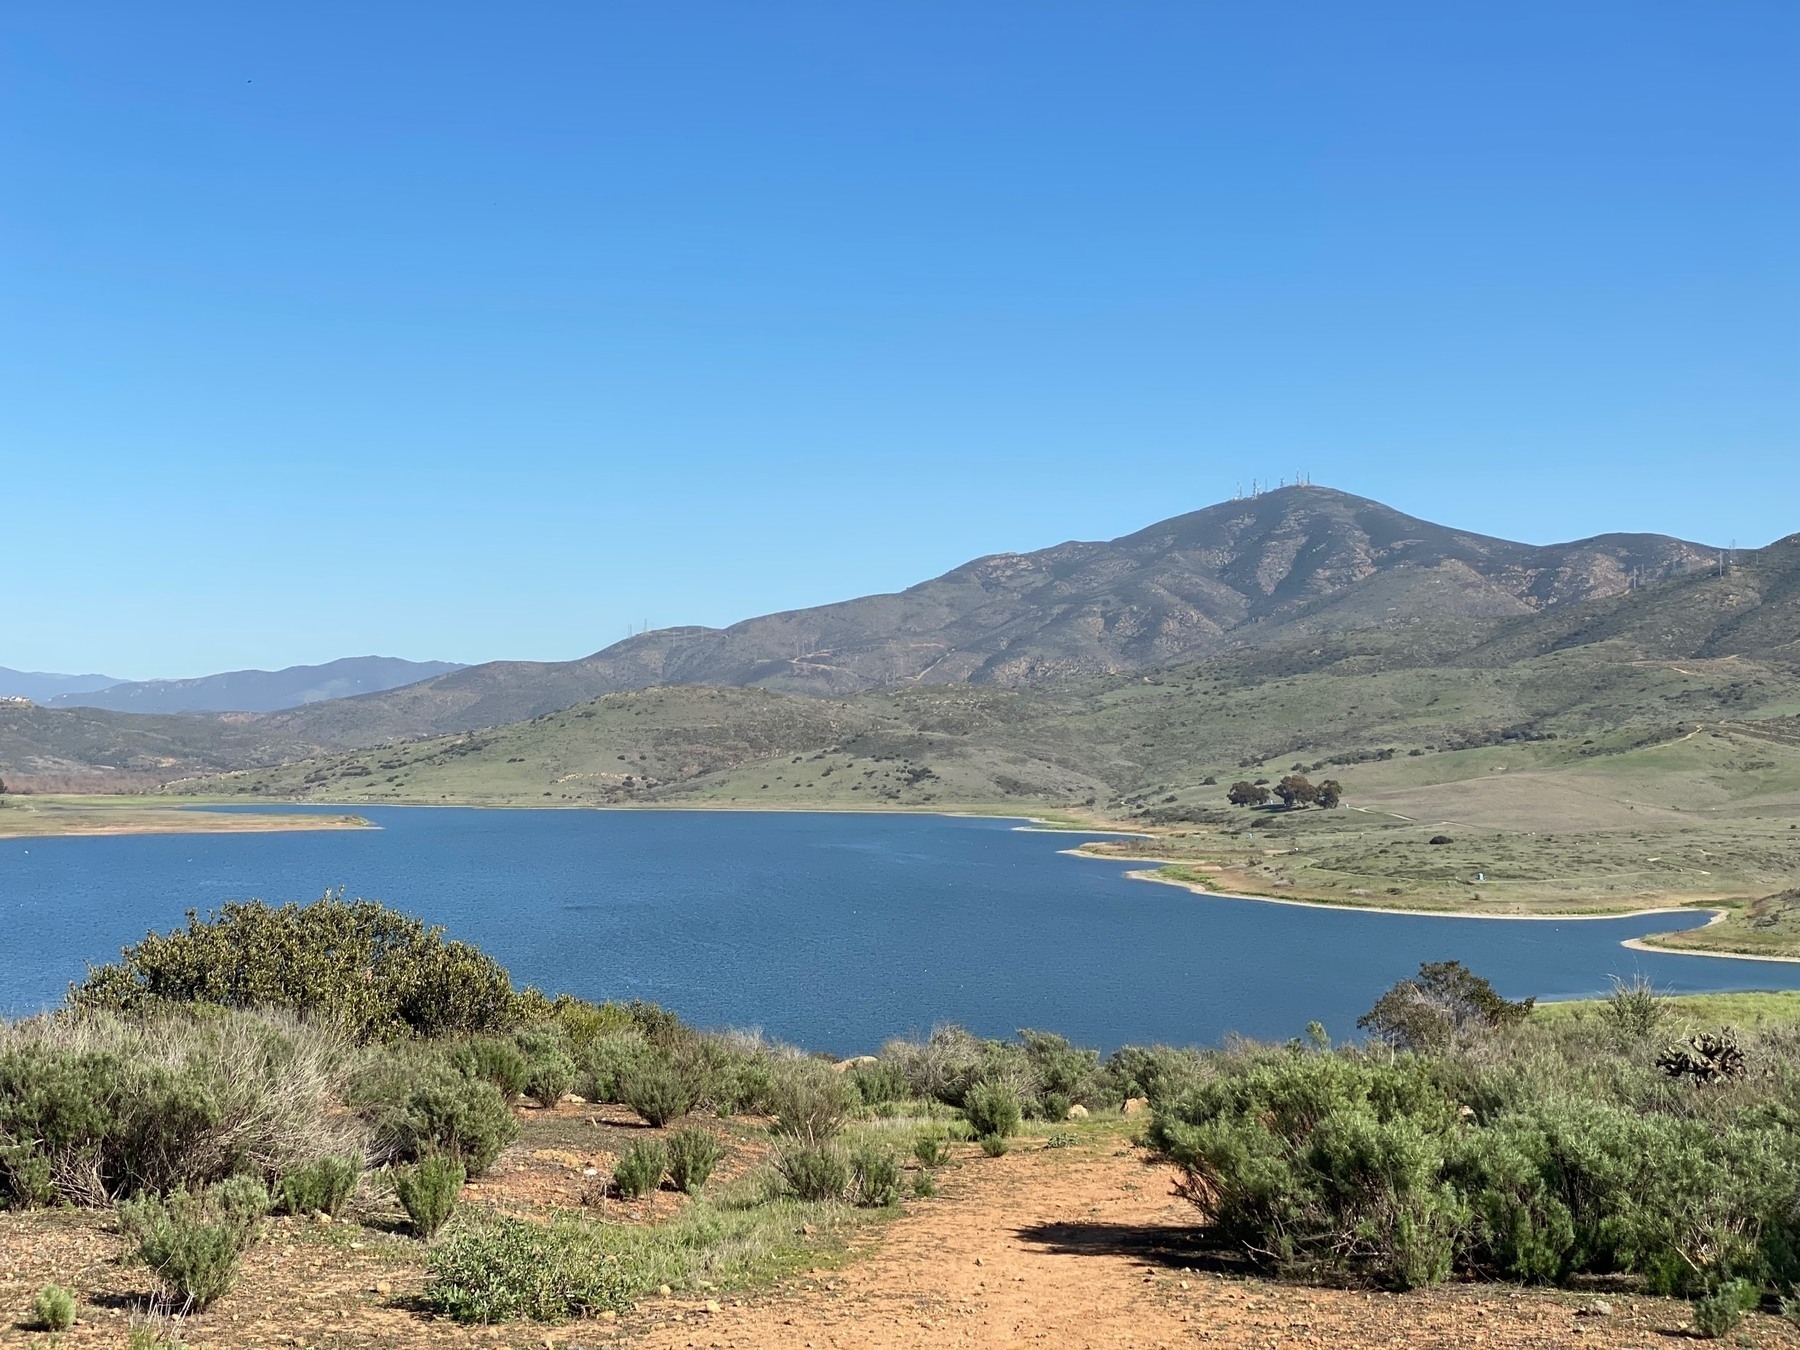 View of a reservoir surrounded by scrub brush, with a tall mountain on the far side.